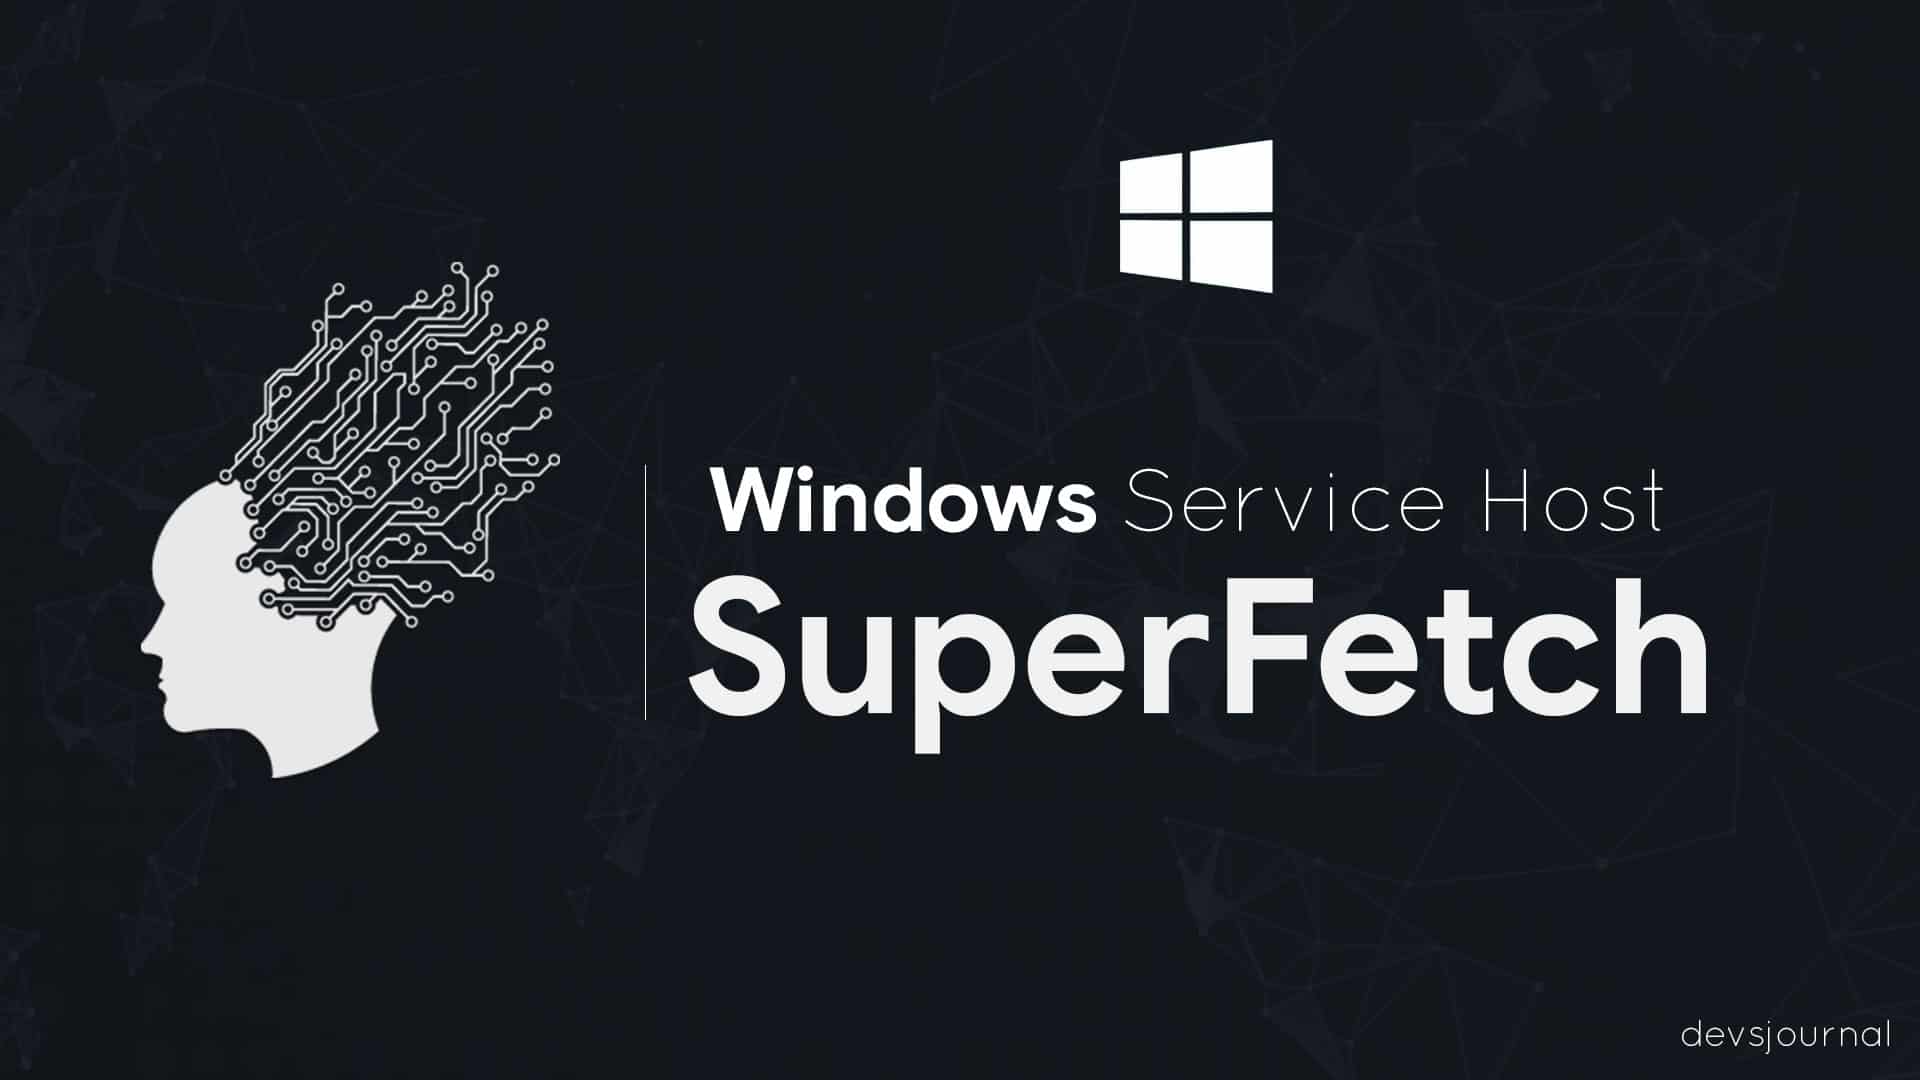 What is Service Host Superfetch Windows 10 2? 